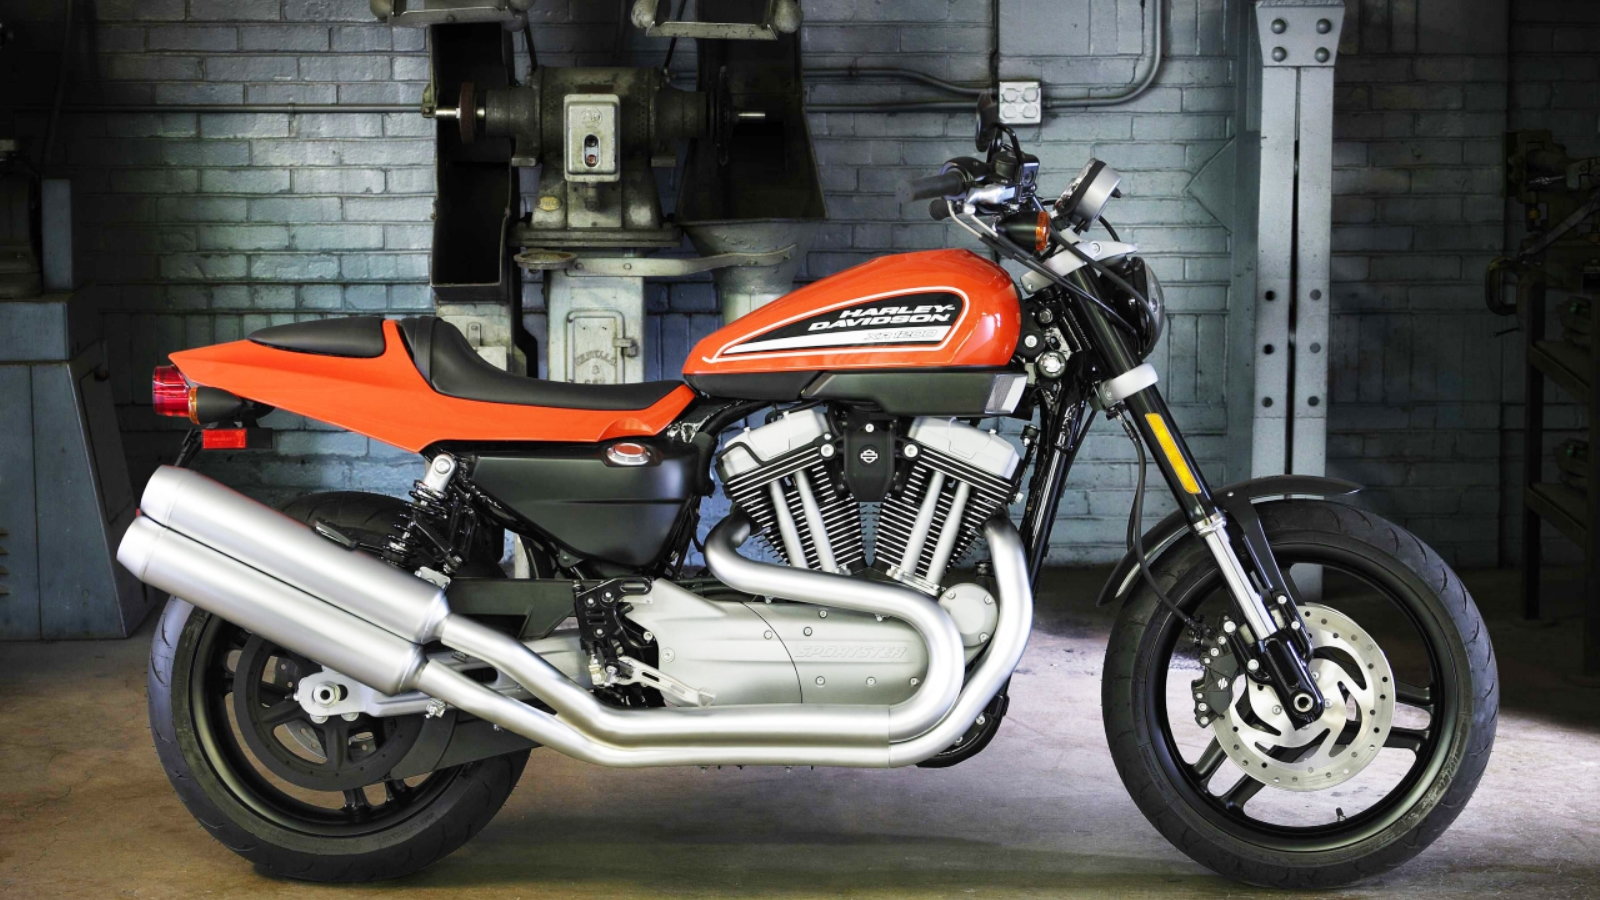 9 Facts About The 1983 84 Harley Davidson Xr1000 Hdforums